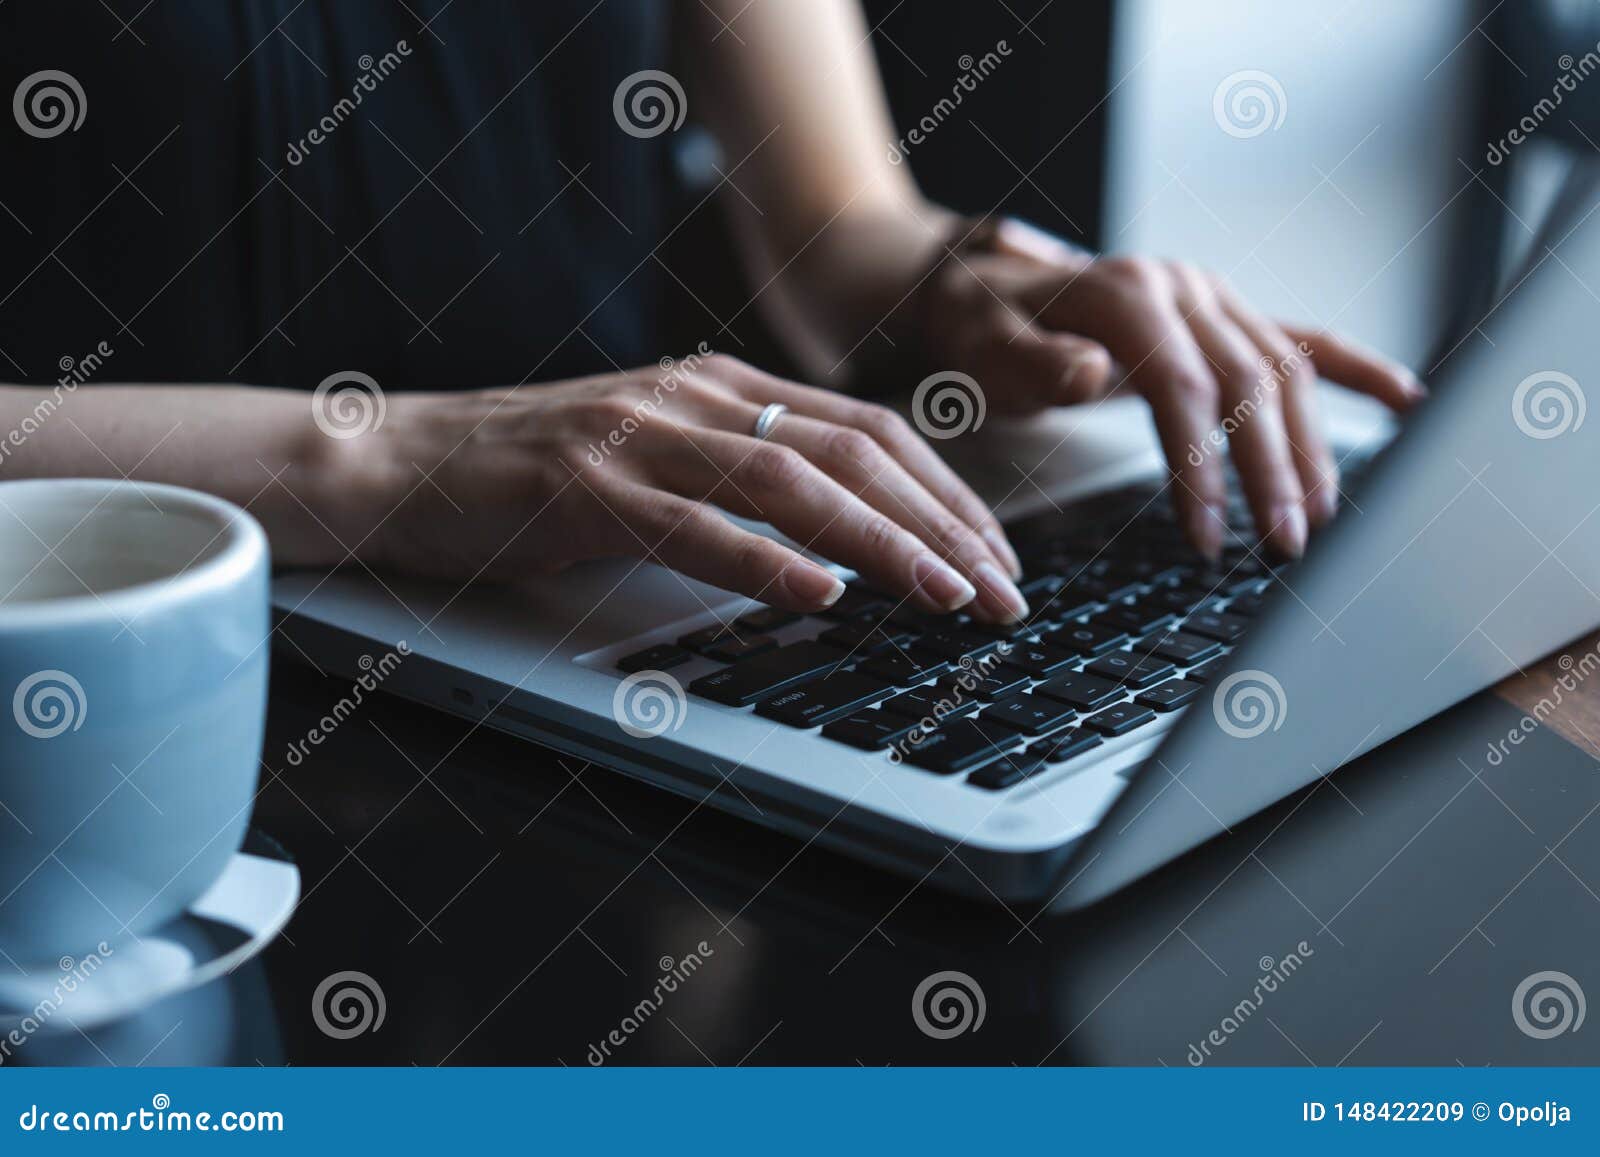 woman using laptop, searching web, browsing information, having workplace at home or in creative office or cafe.